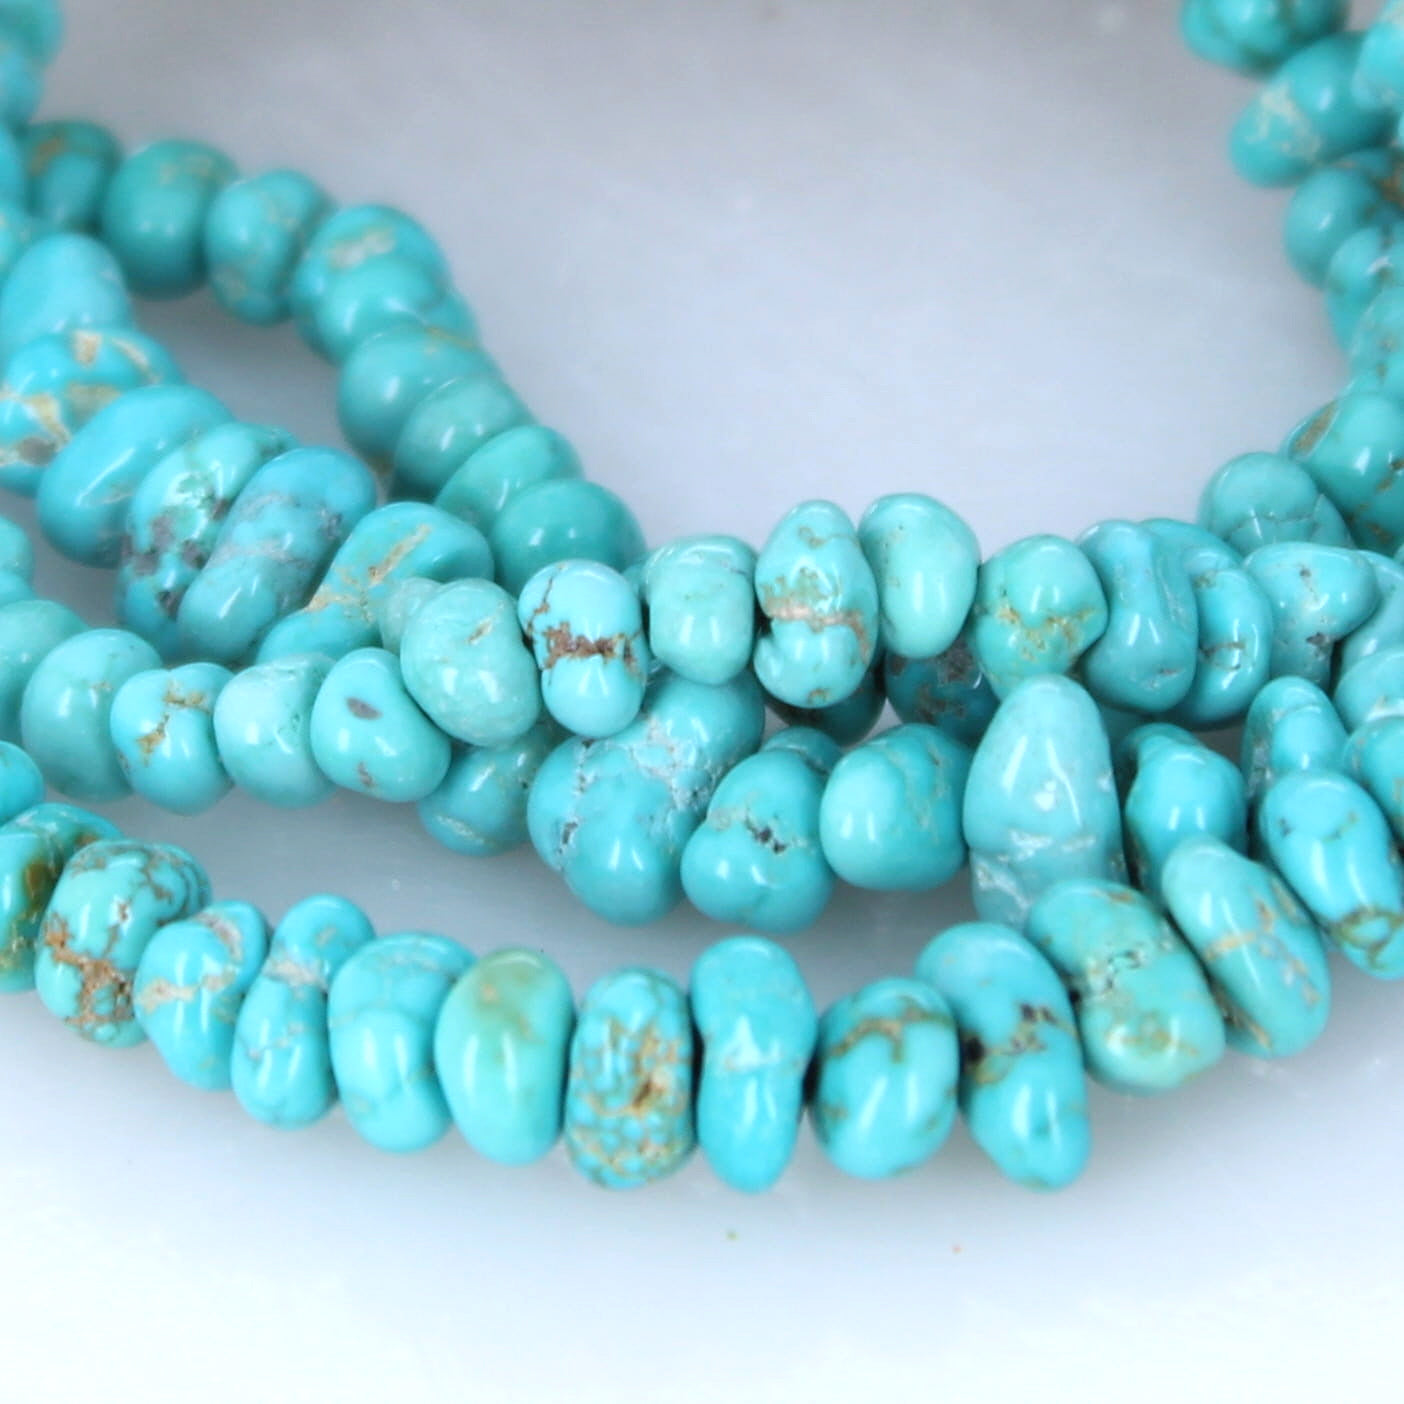 Rare LONE MOUNTAIN TURQUOISE Beads 4-7mm Teal Blue